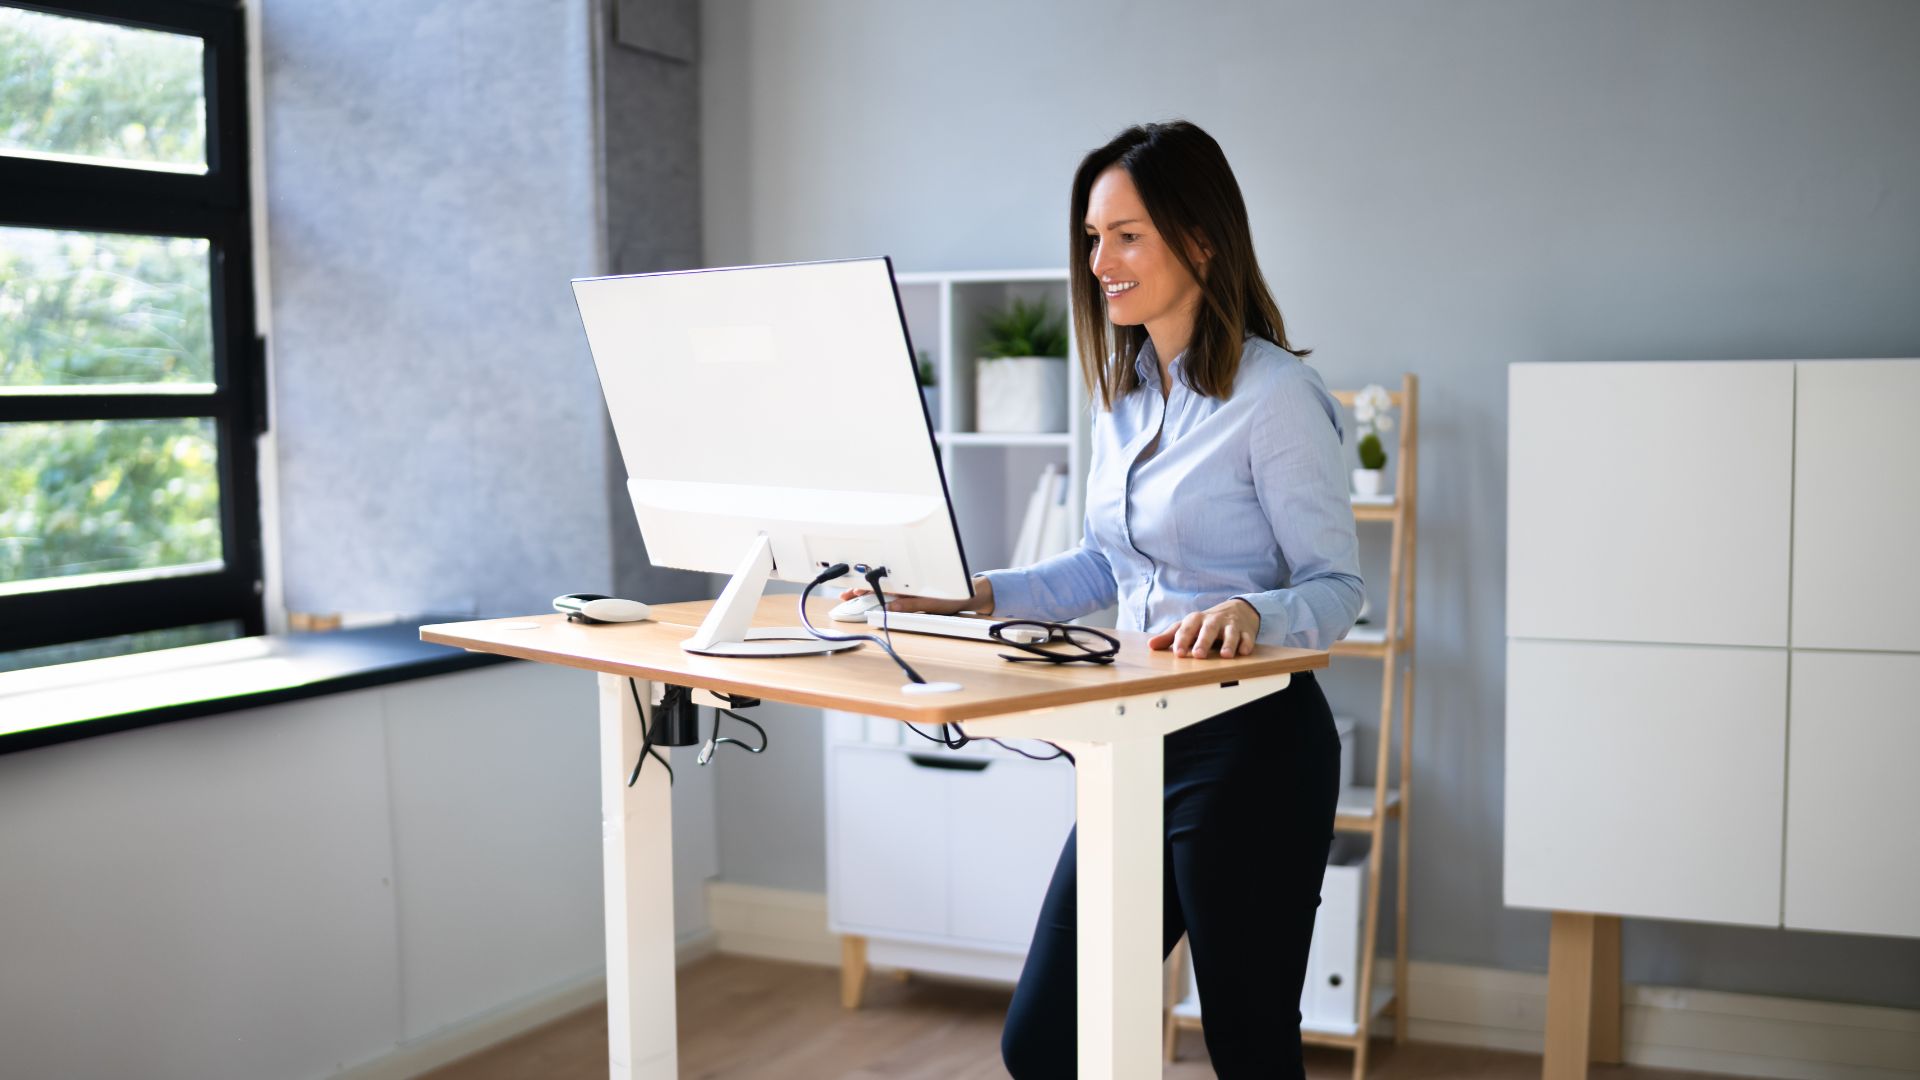 Benefits of Working on a Standing Desk